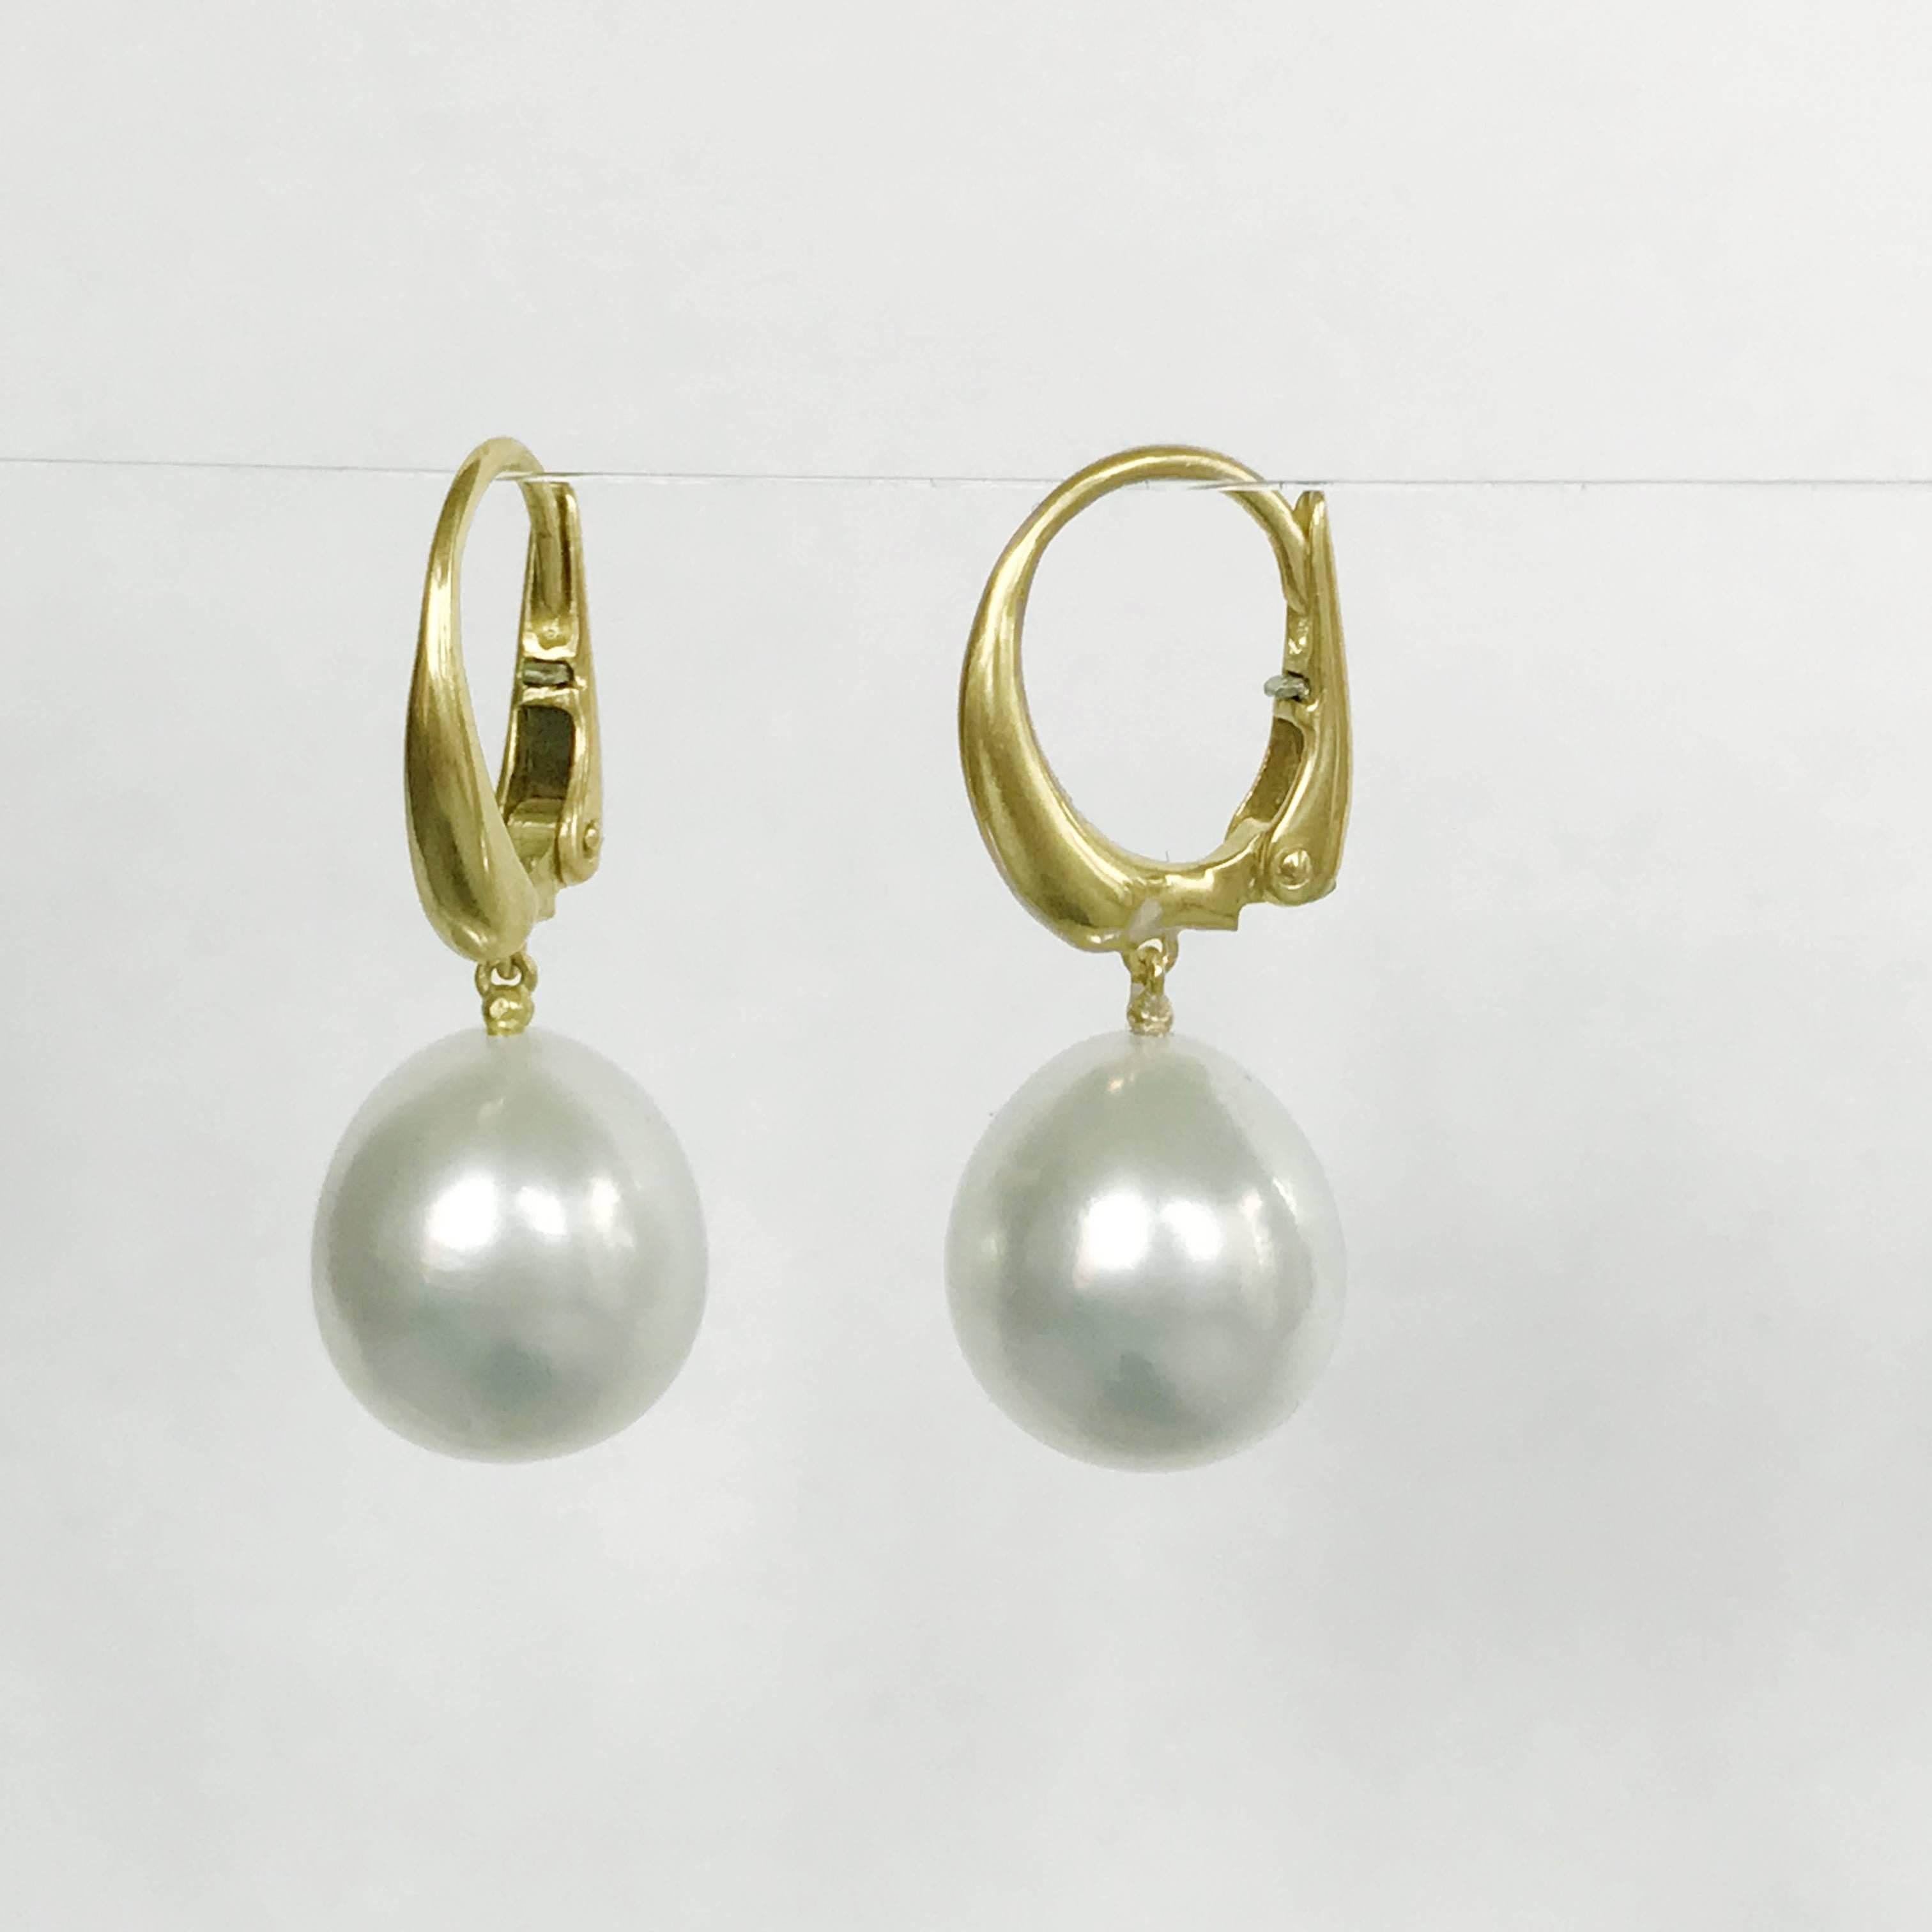 Dalben design 18 kt semi-lucid finished yellow gold earrings with two lightly drop shape Australian South Sea pearls of 11,4 x 12,6 mm  weight 23 carat . 
Earring dimension :  
width 11,4 mm 
height with leverback 28,7 mm  
The earrings has been